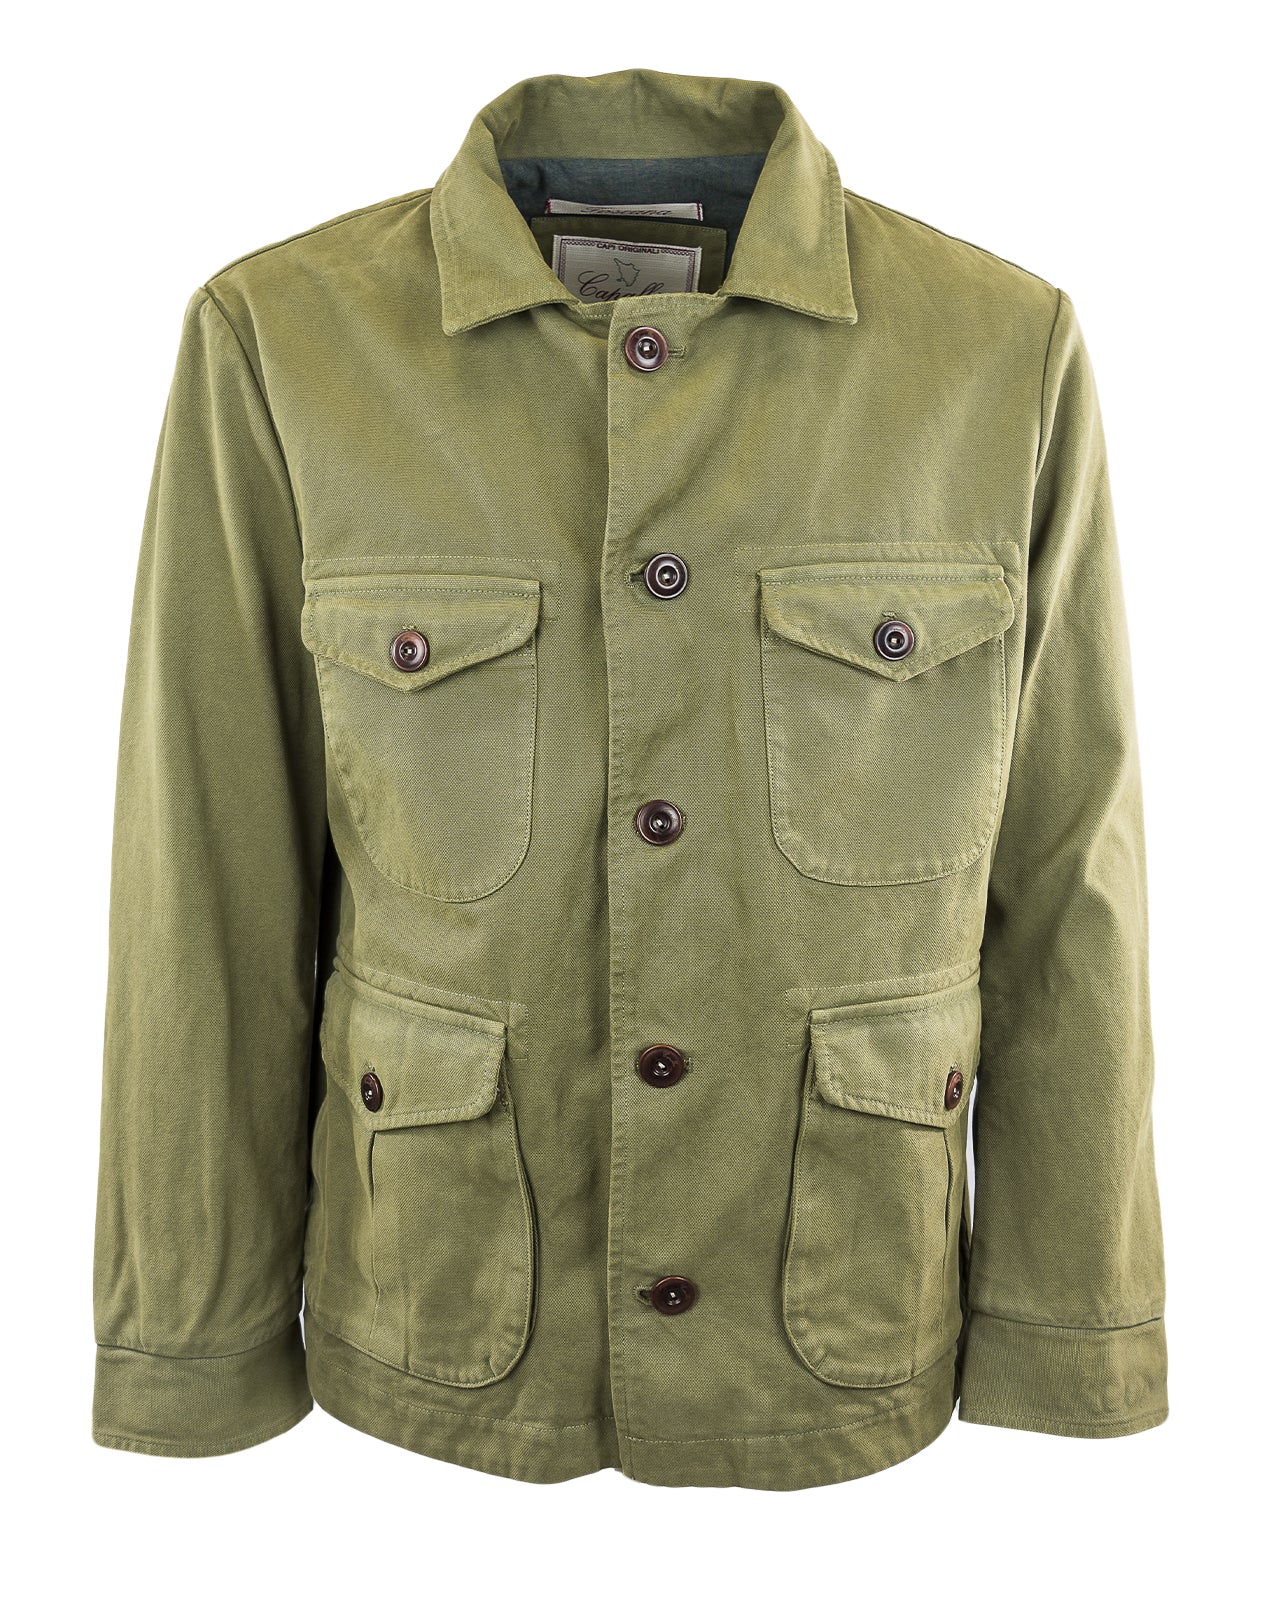 OVERSHIRT IN CANVAS COTTON CANVAS